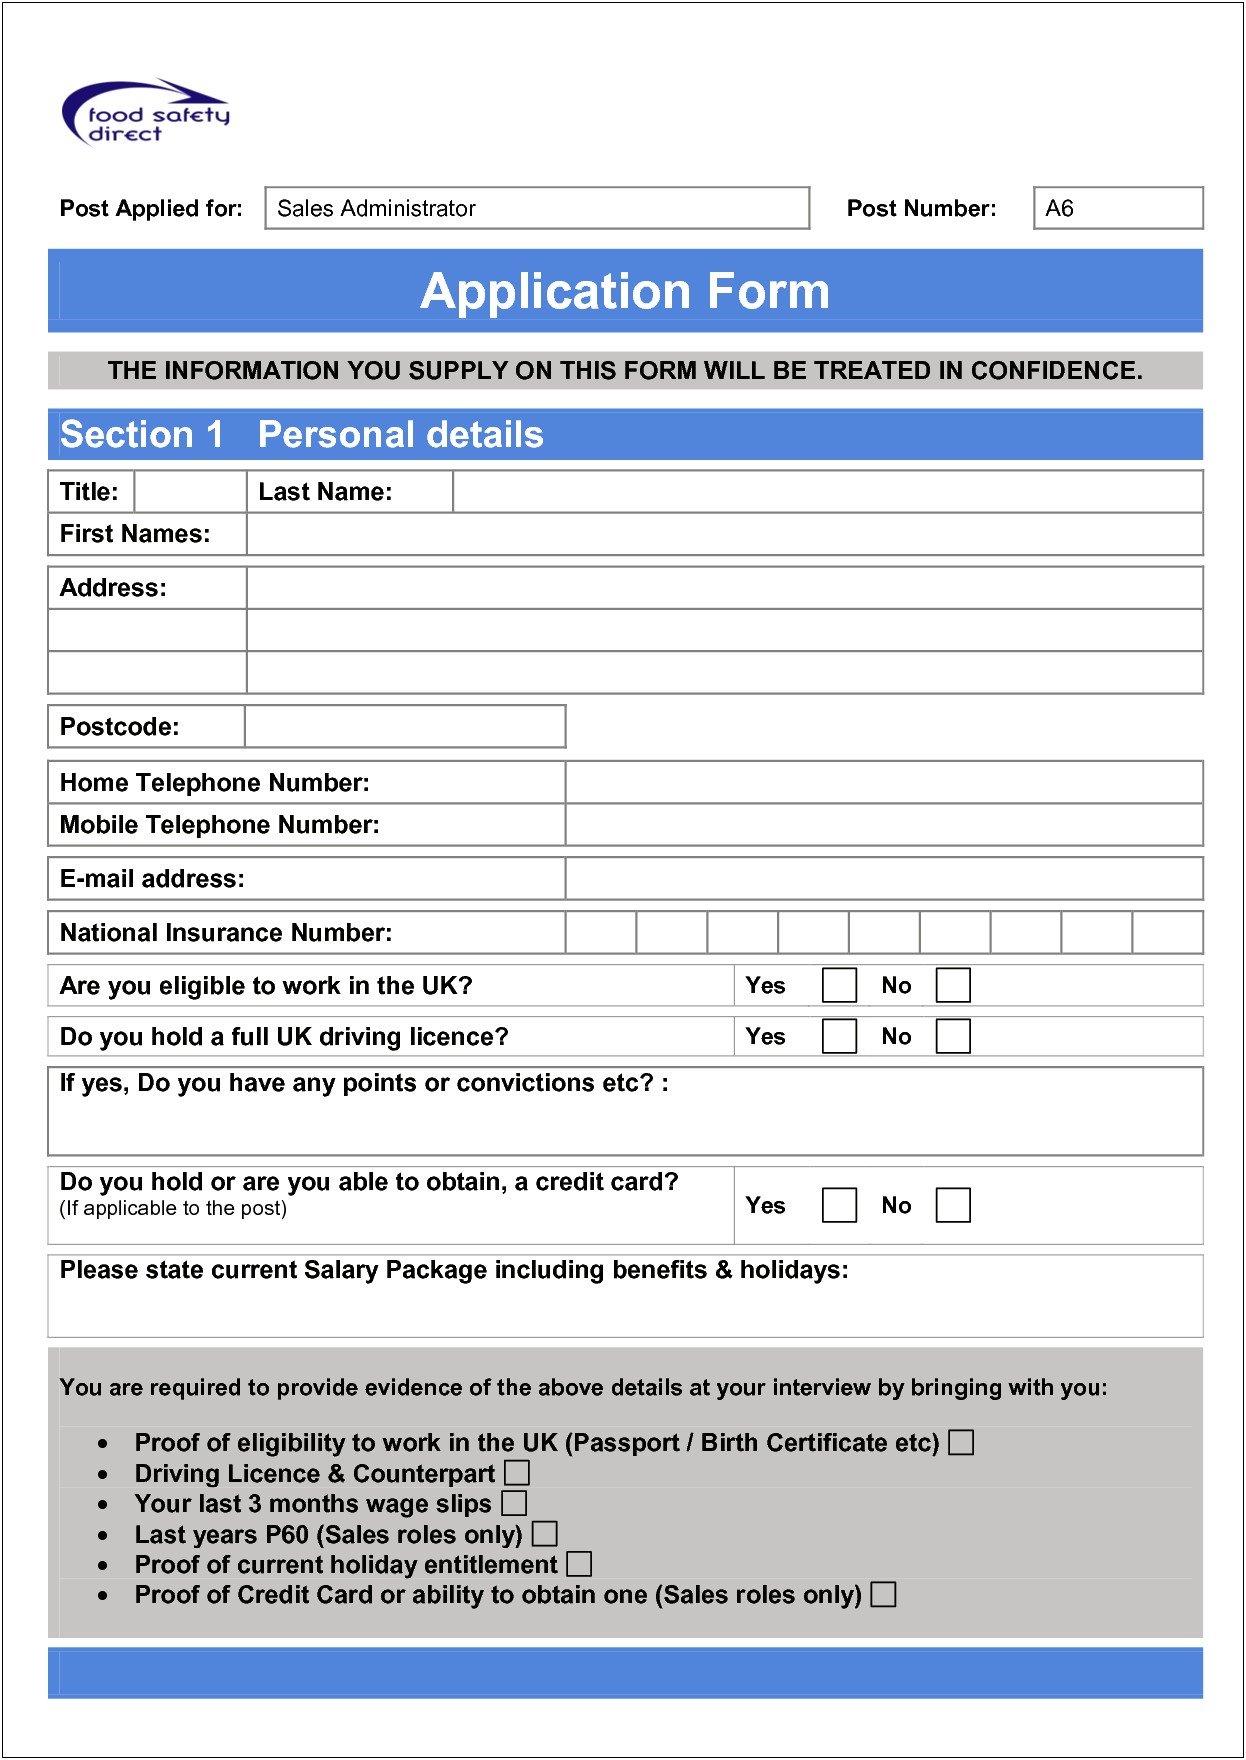 Free Generic Employment Application Form Template